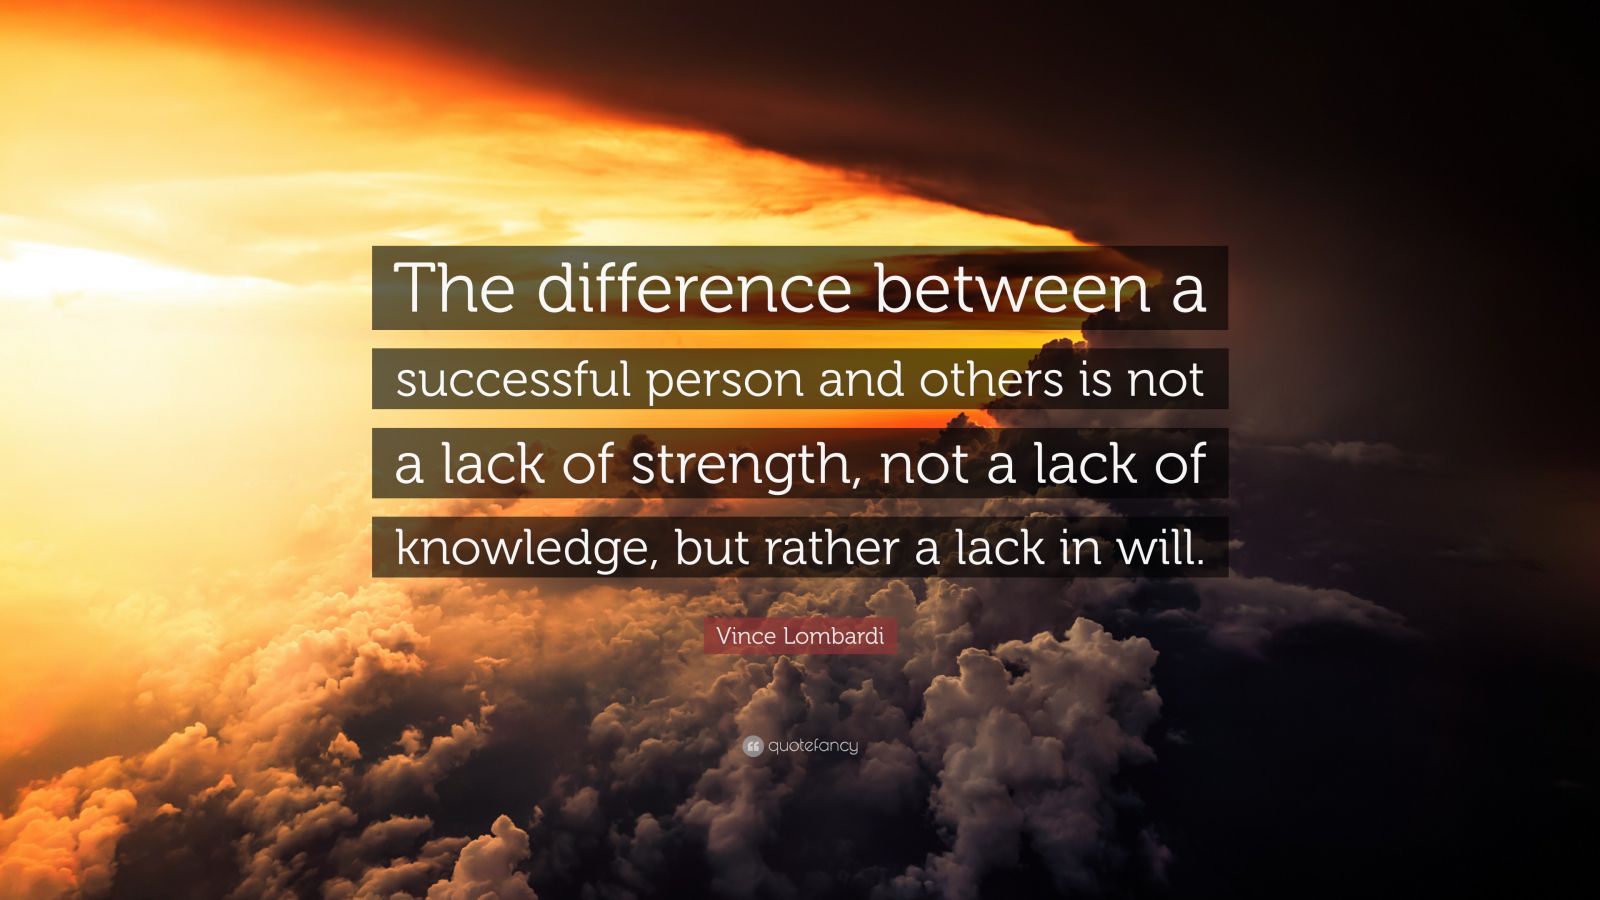 Vince Lombardi Quote: “The difference between a successful person and